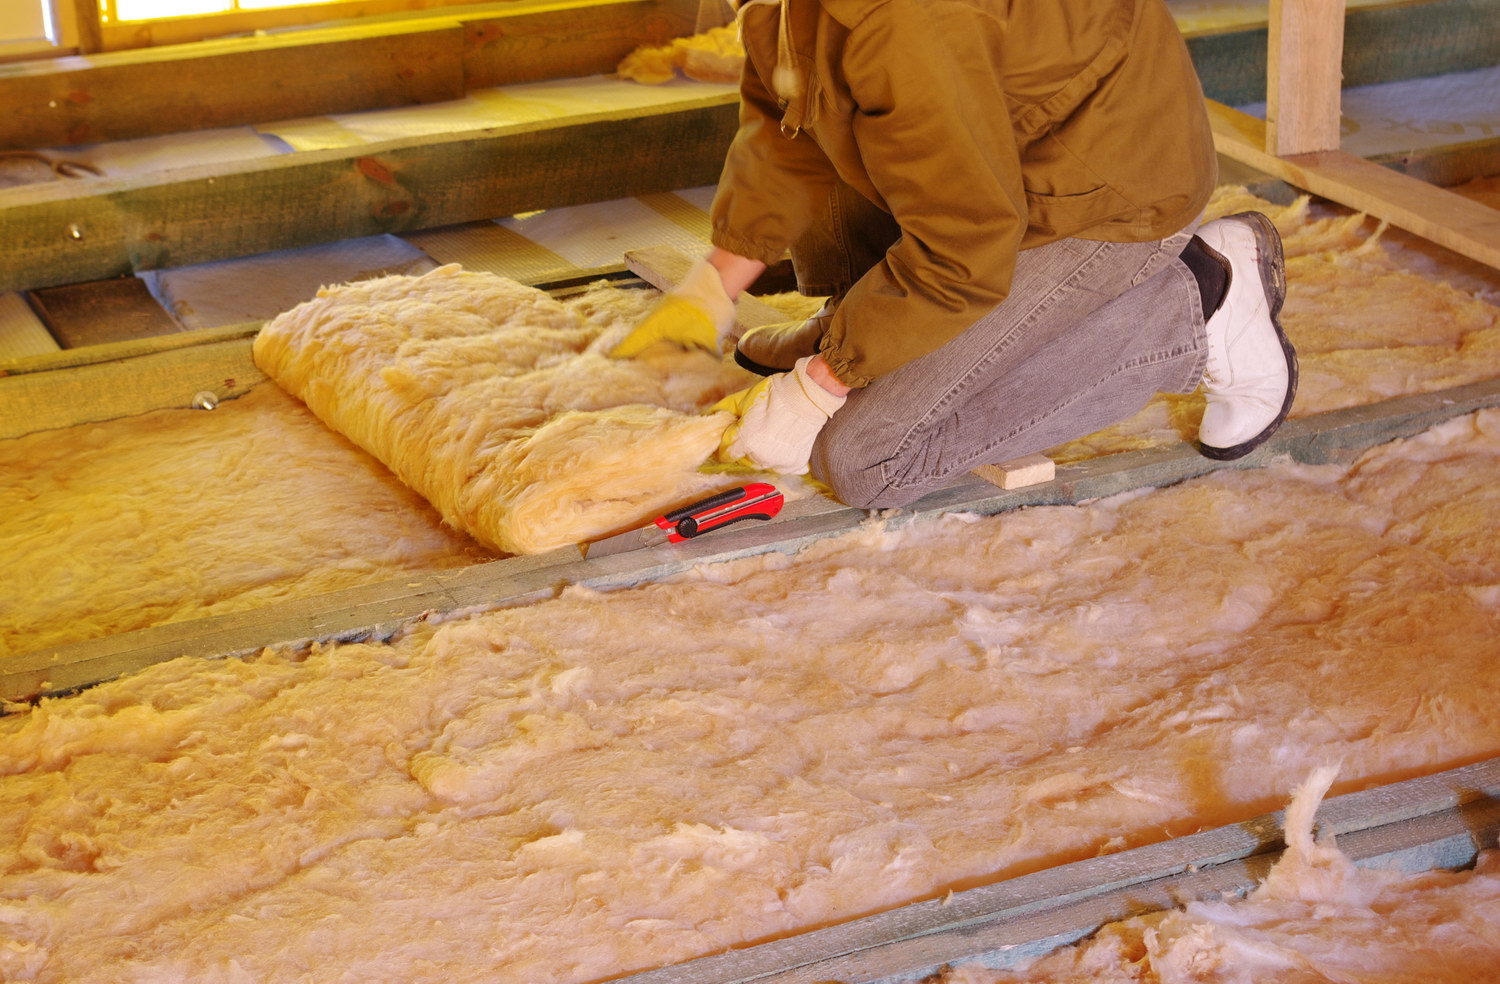 Insulation of the floor when groundwater is close to the surface